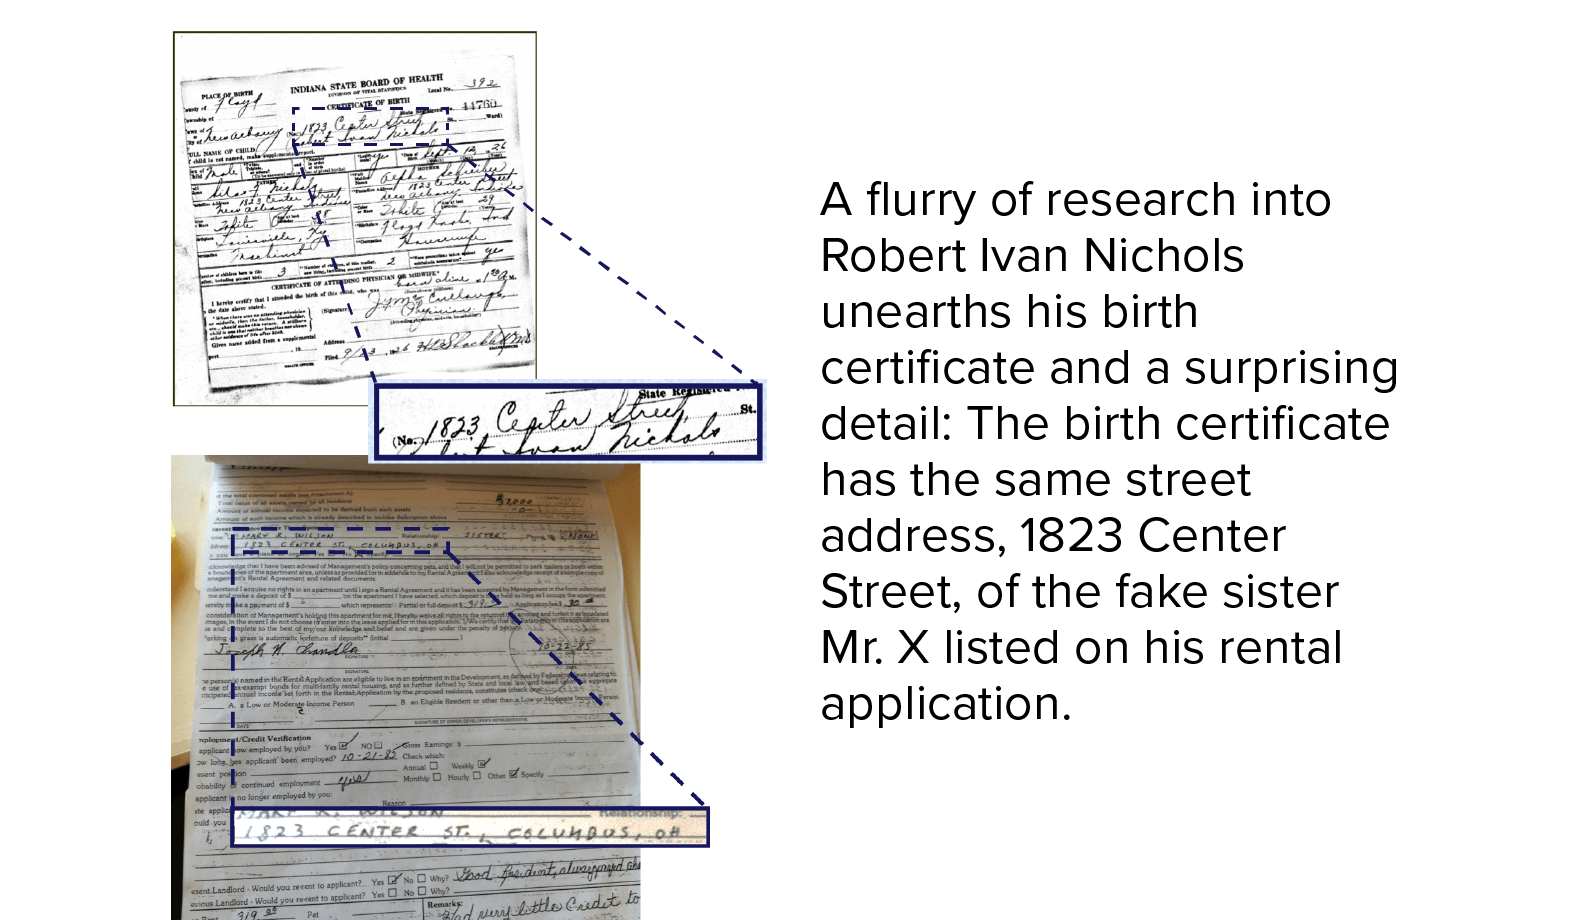 A flurry of research into Robert Ivan Nichols unearths his birth certificate and a surprising detail: the birth certificate has the same street address, 1823 Center Street, of the fake sister Mr. X listed on his rental application.